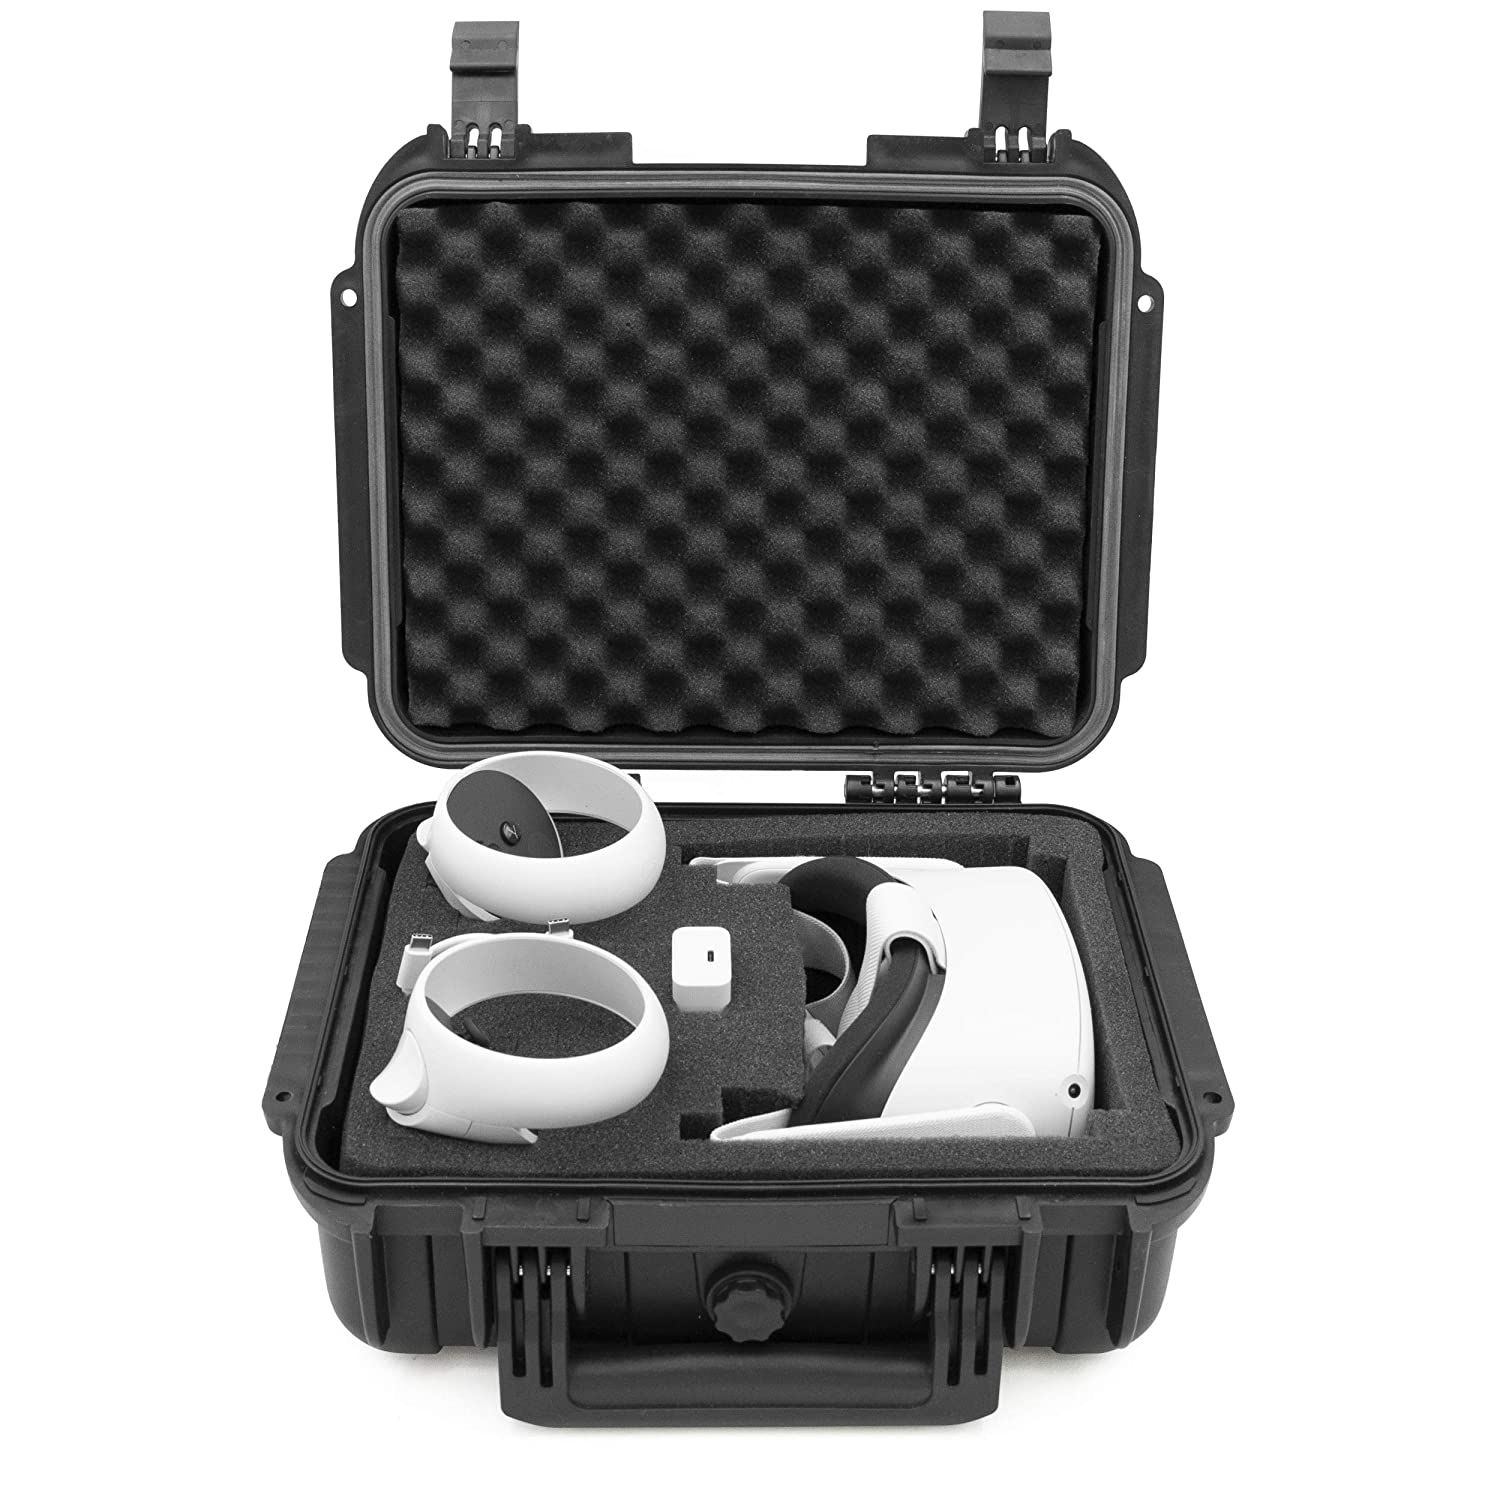 CASEMATIX Waterproof Hard Case Compatible with Quest 2 and Oculus Quest VR Gaming Headset & Accessories with Customizable Foam Interior | Lightweight & Affordable Hard Cases For Microphones, PS5s & More